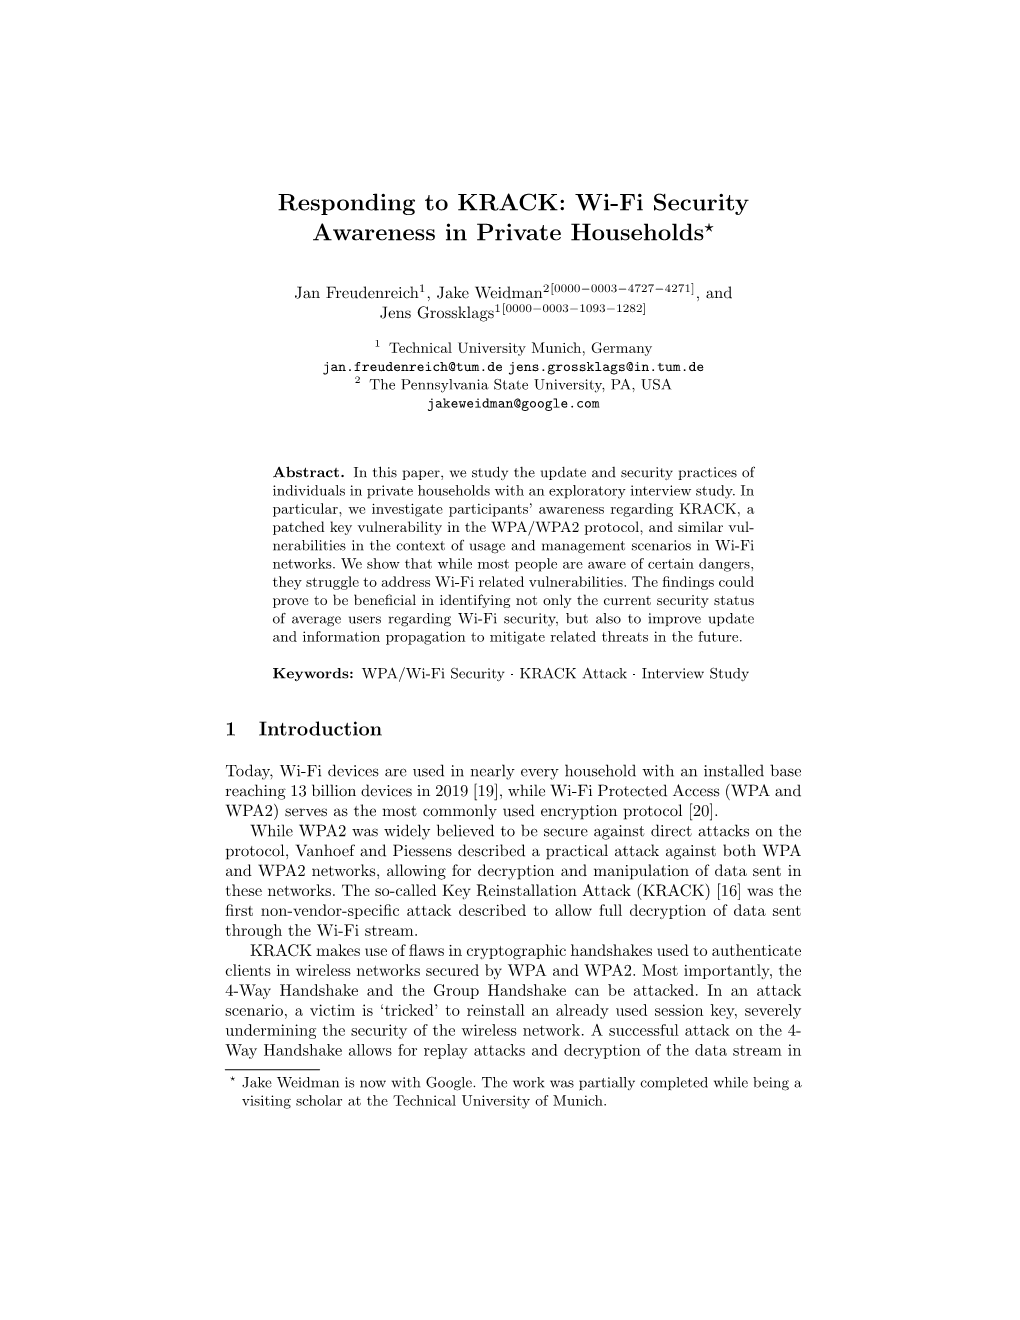 Responding to KRACK: Wi-Fi Security Awareness in Private Households?